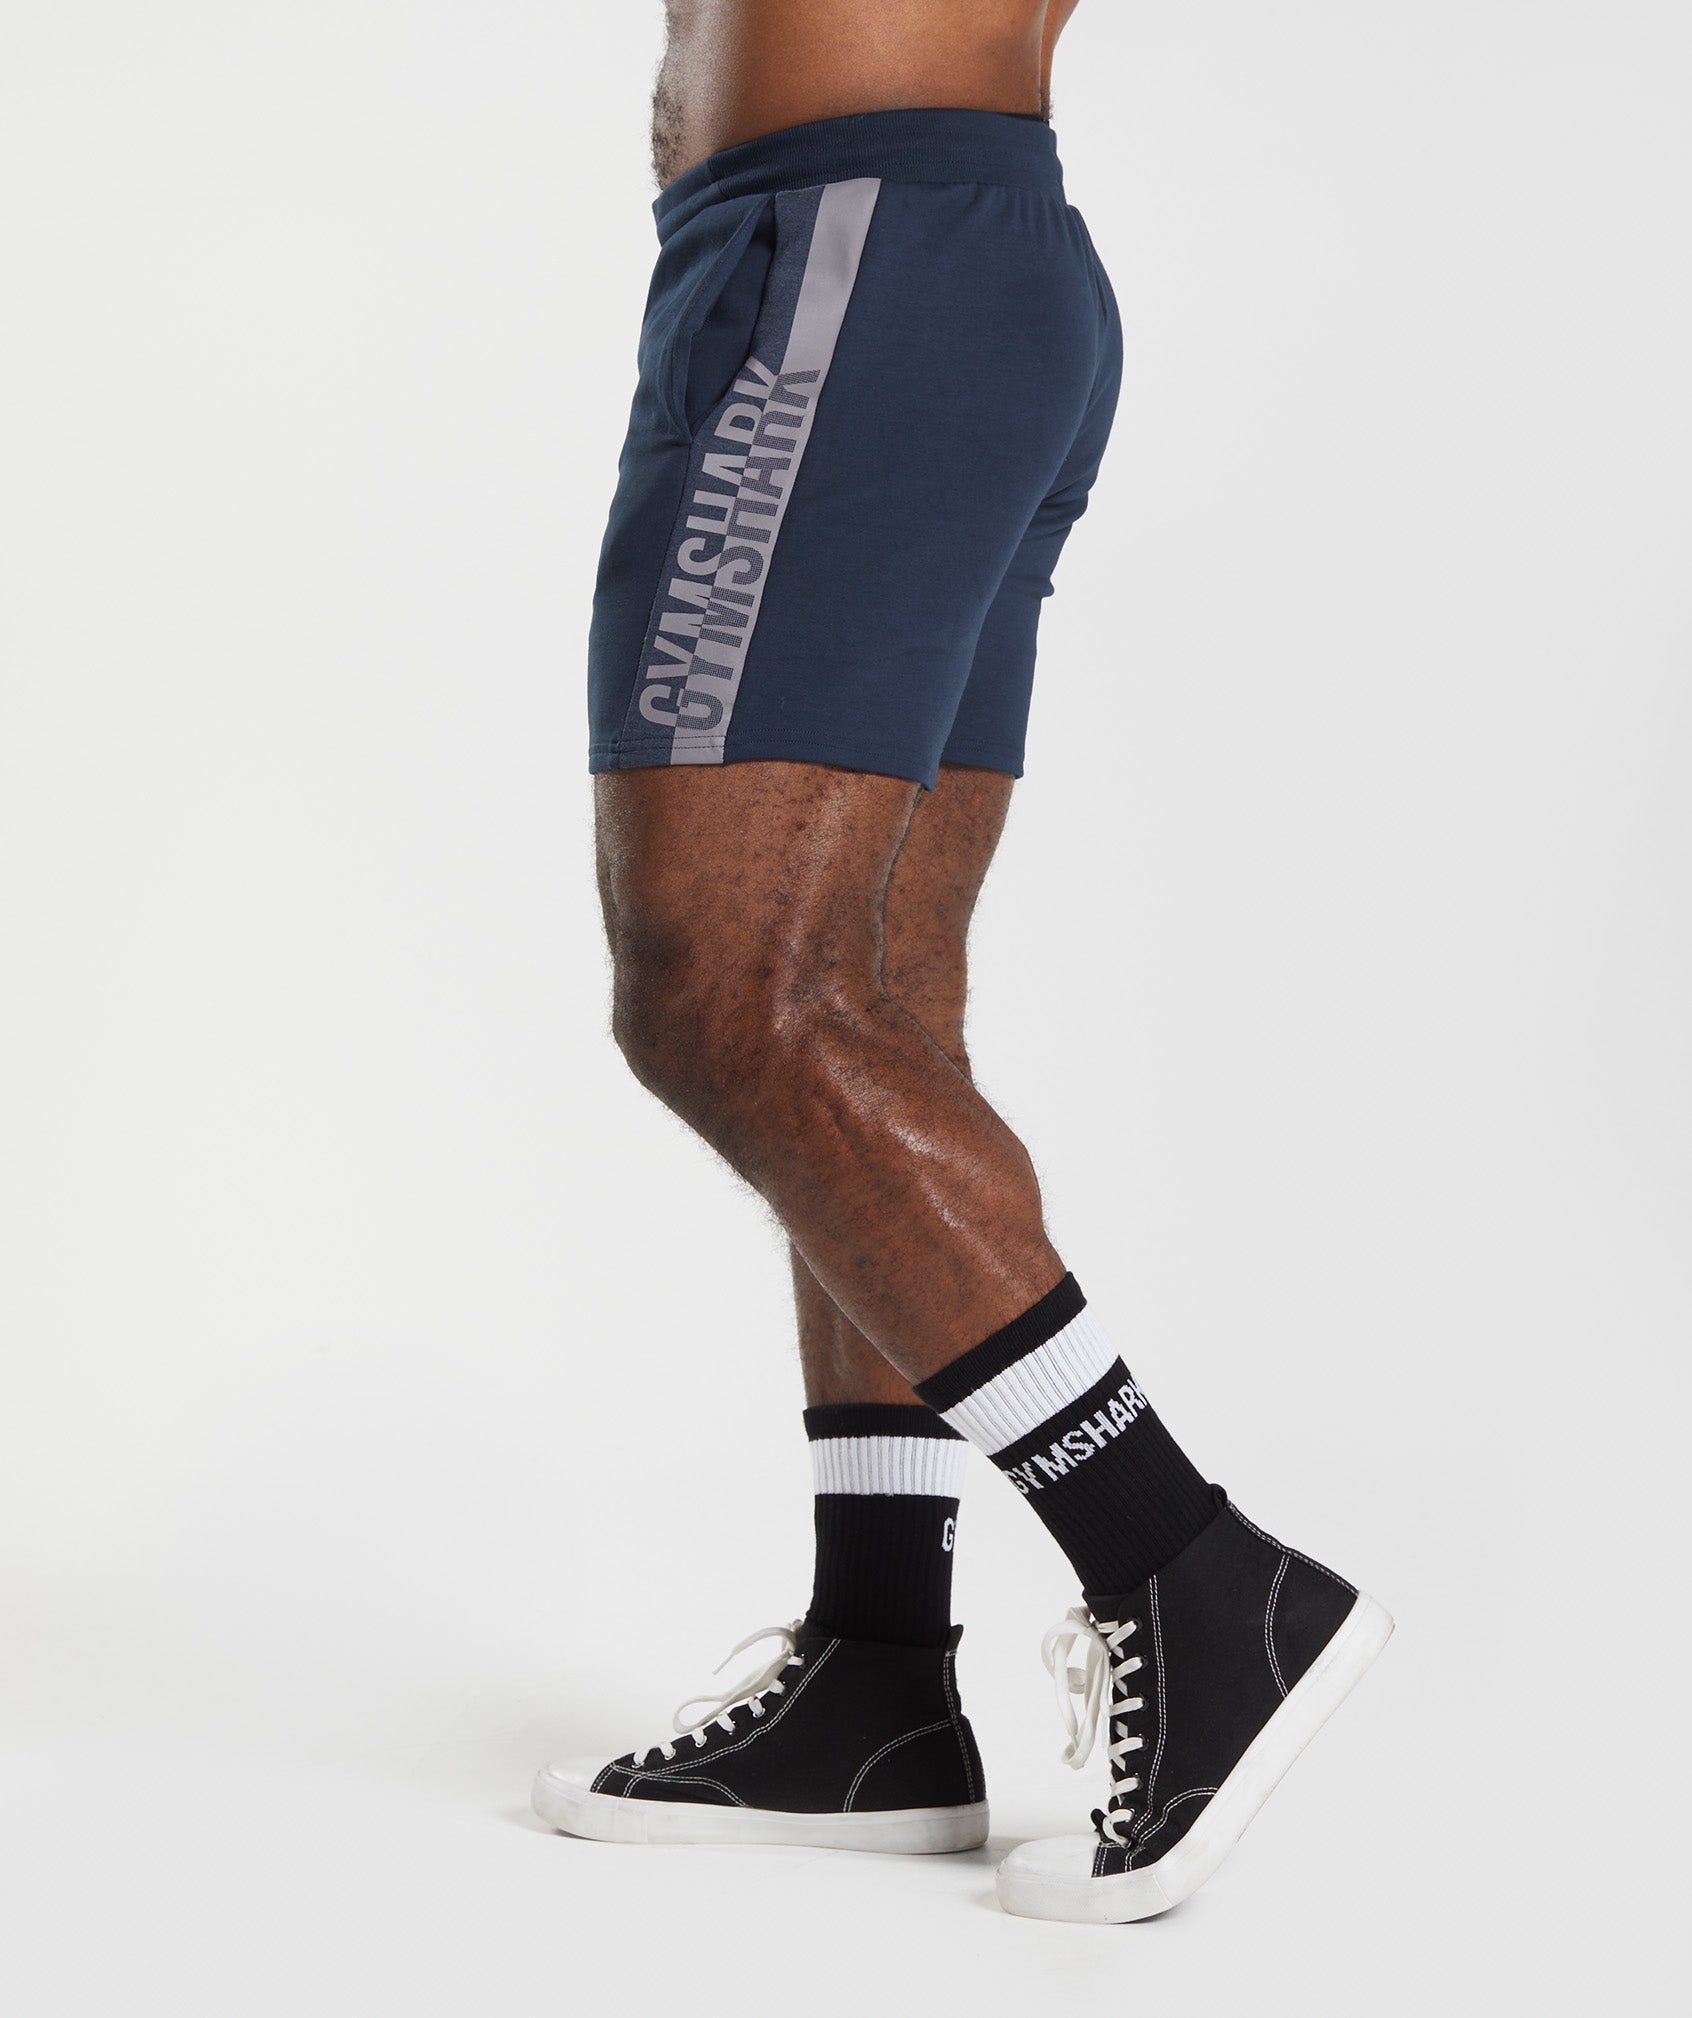 Bold React 5" Shorts in Navy - view 3